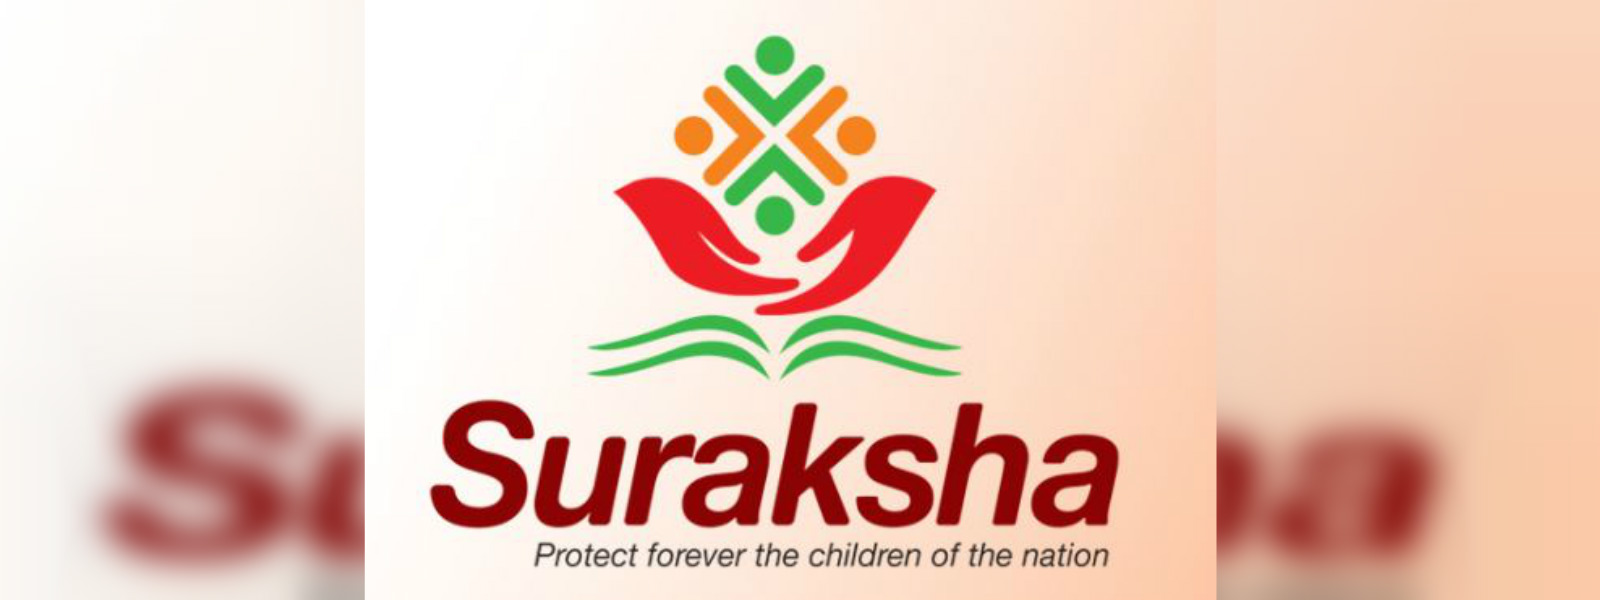 Cabinet paper to extend Suraksha insurance to 2019